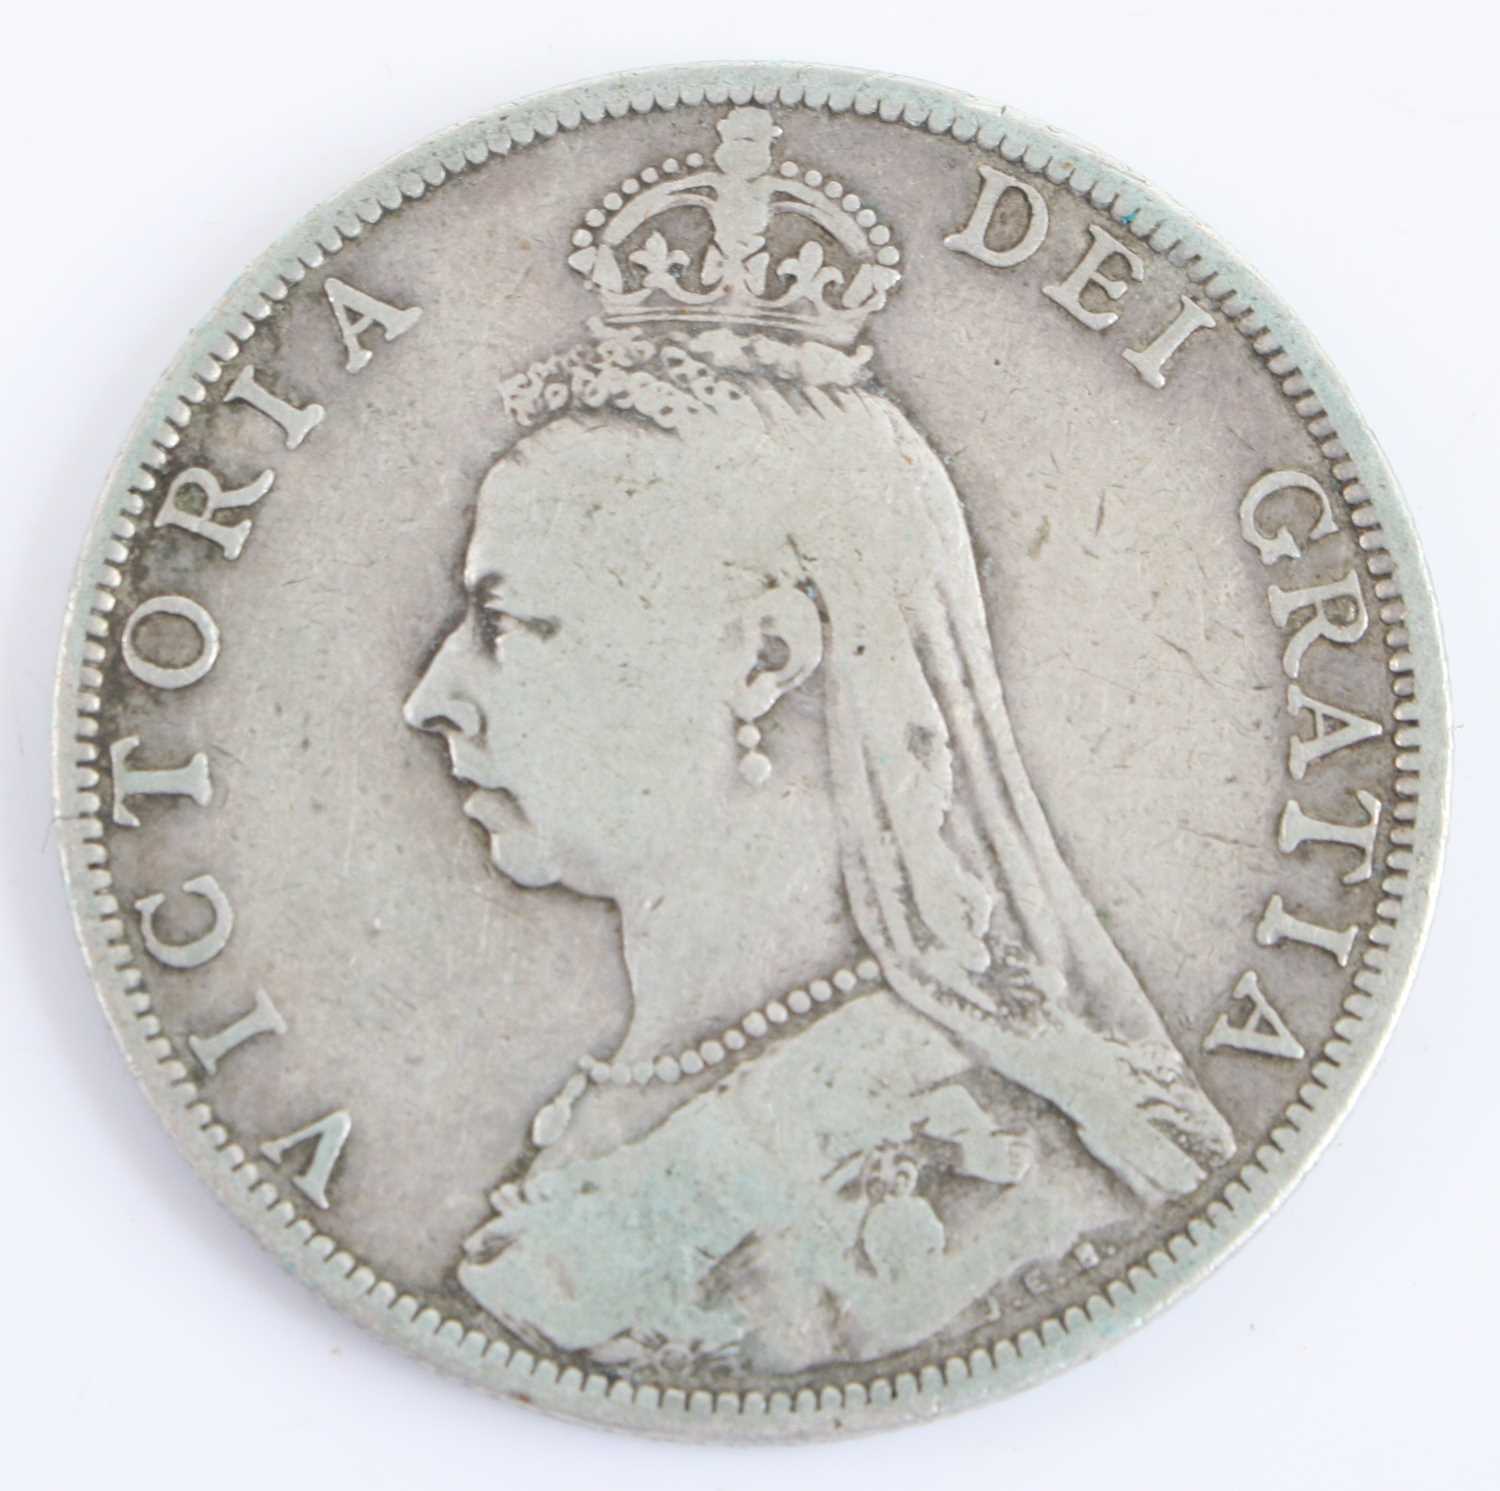 Great Britain, 1885 half crown, Victoria young bust, rev: crowned quartered shield within wreath, - Image 3 of 5